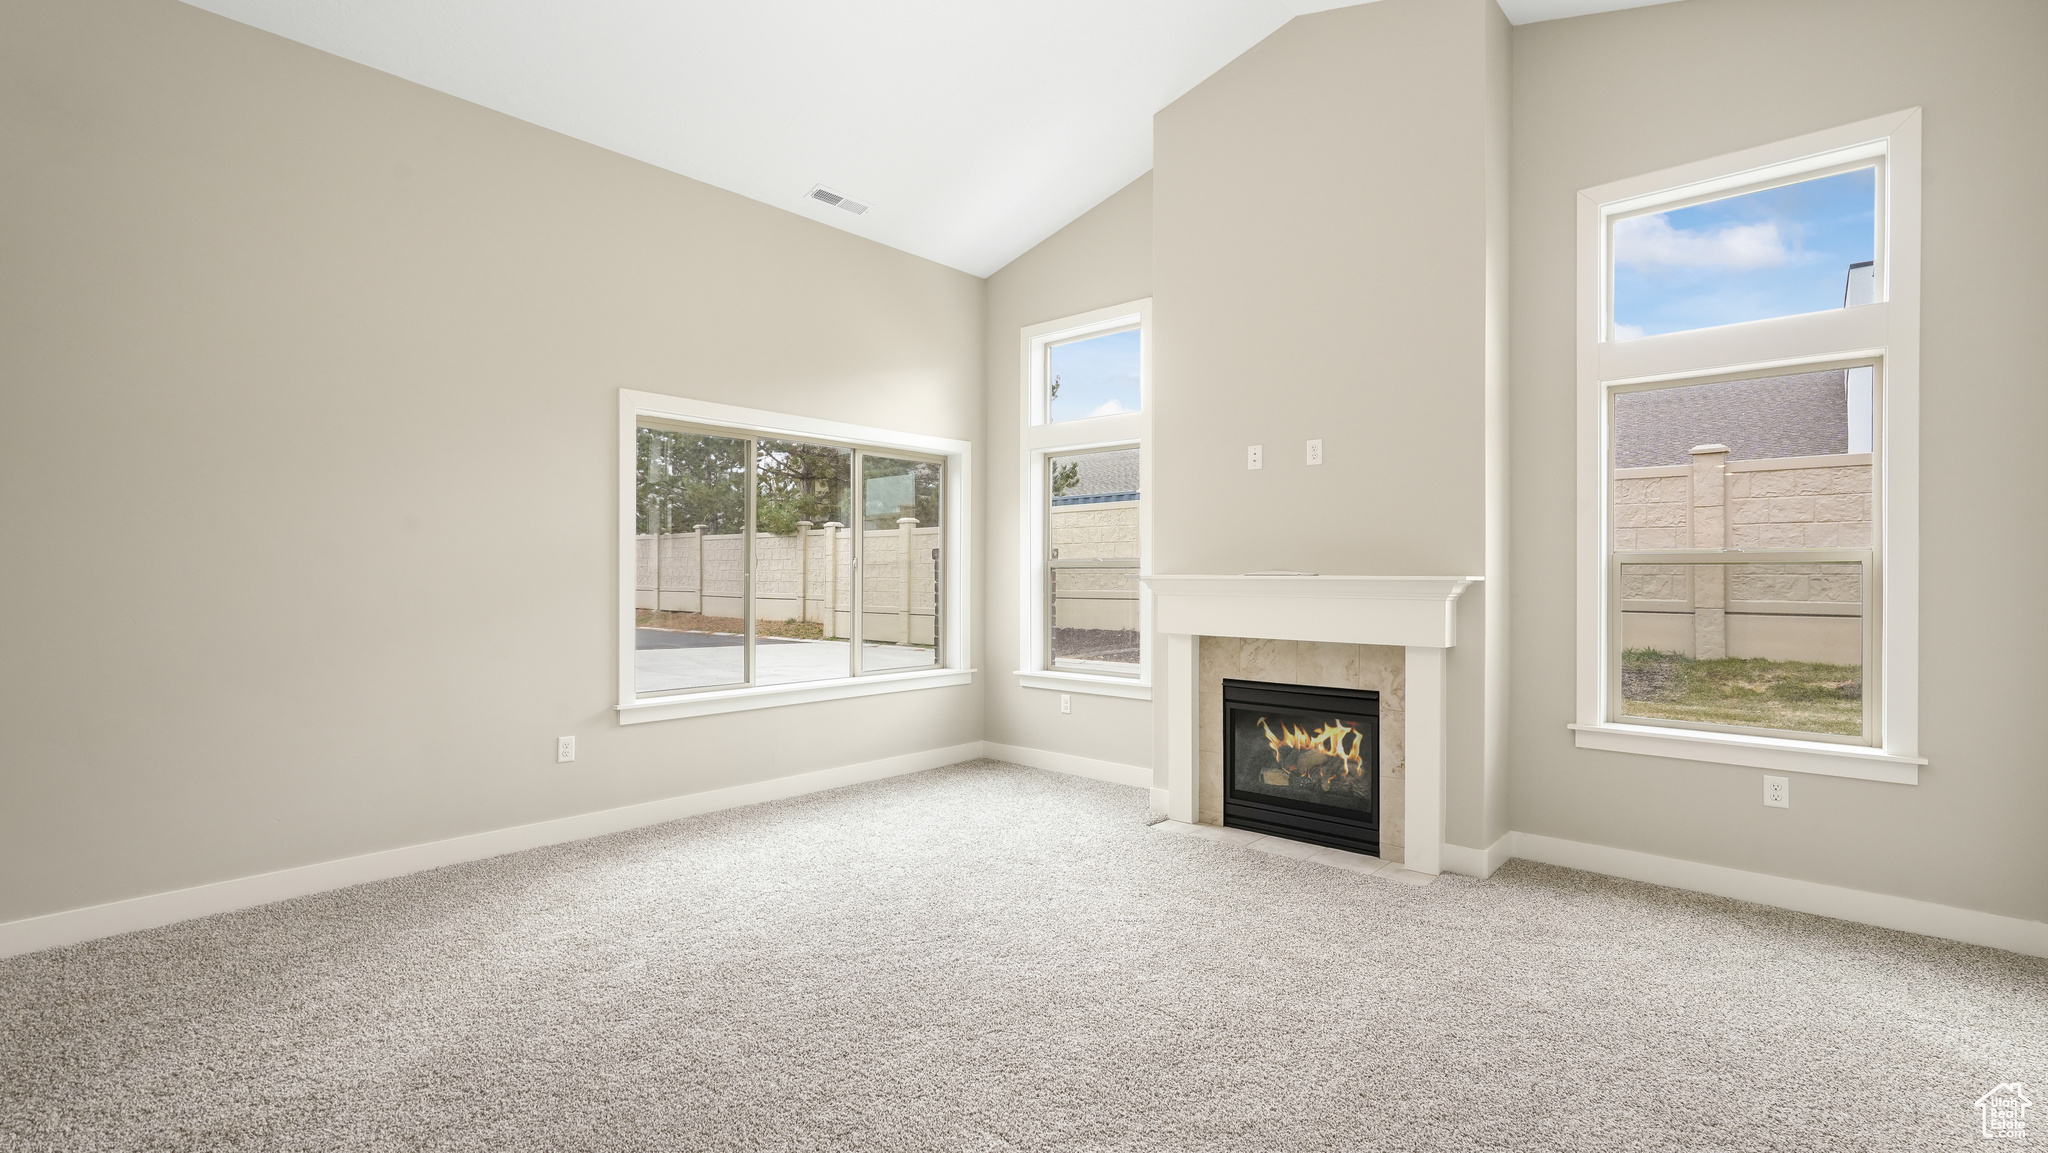 Great room with cozy fireplace and vaulted ceilings.